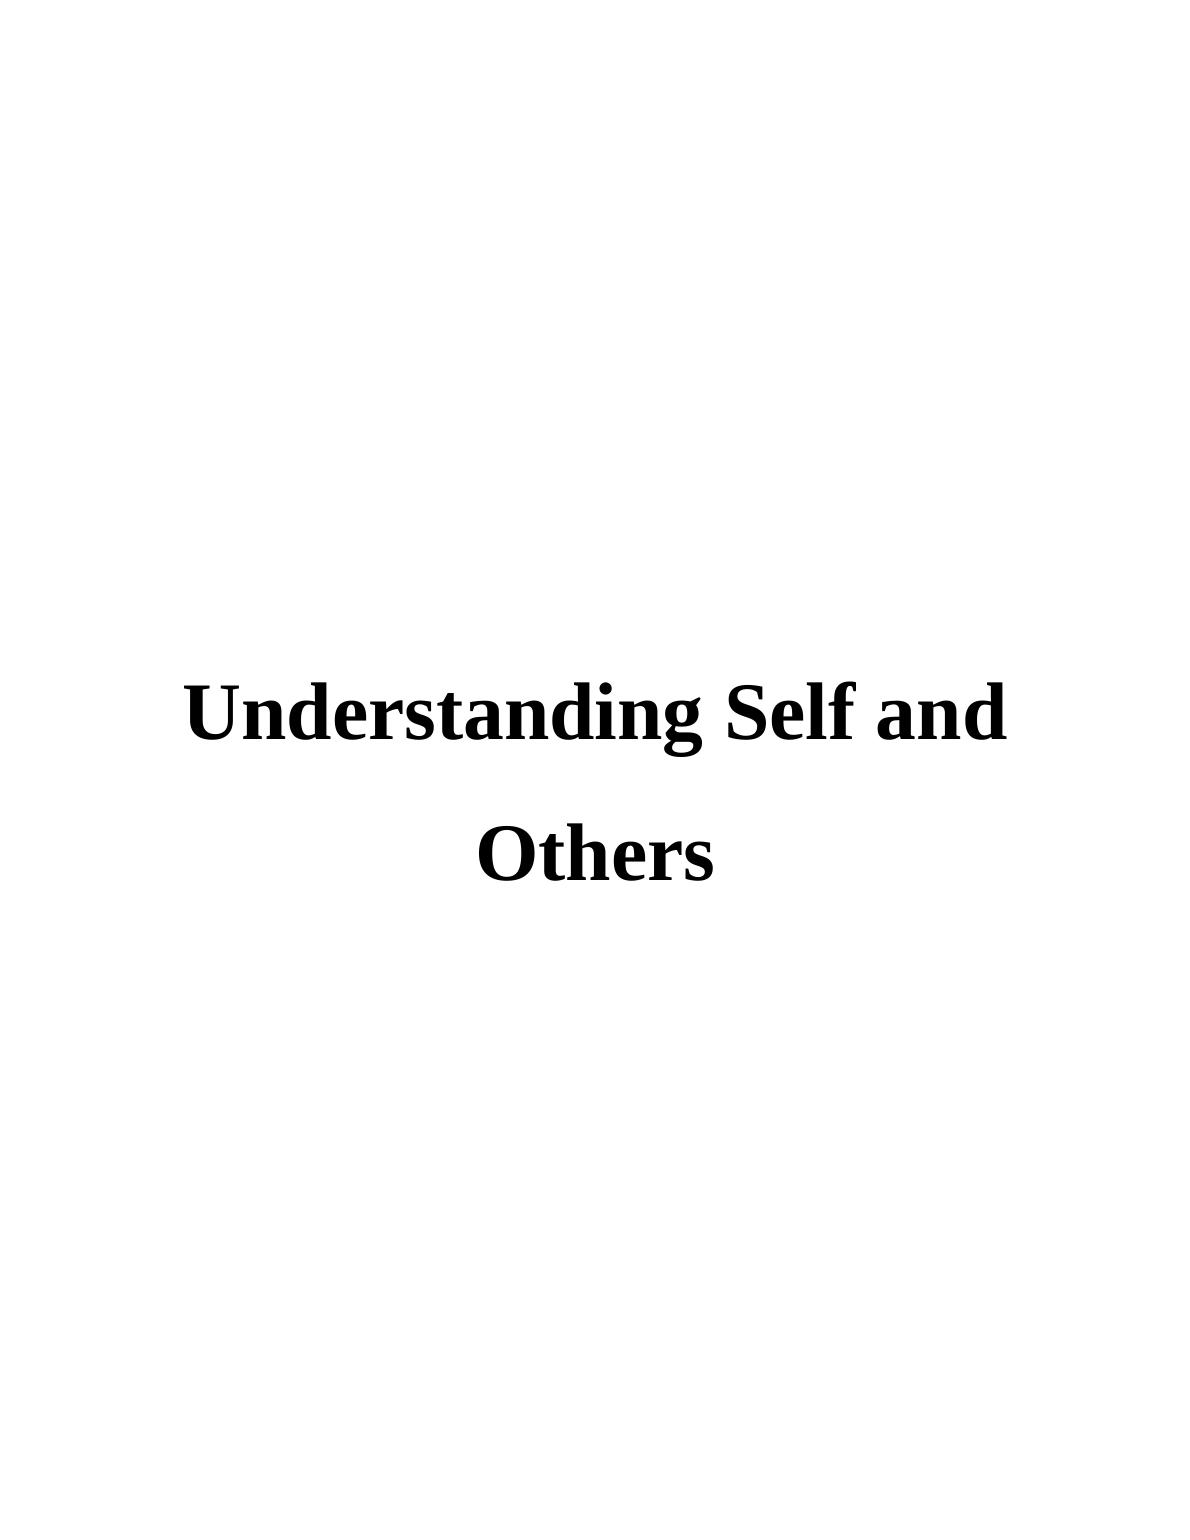 Research on Understanding Self and Others_1